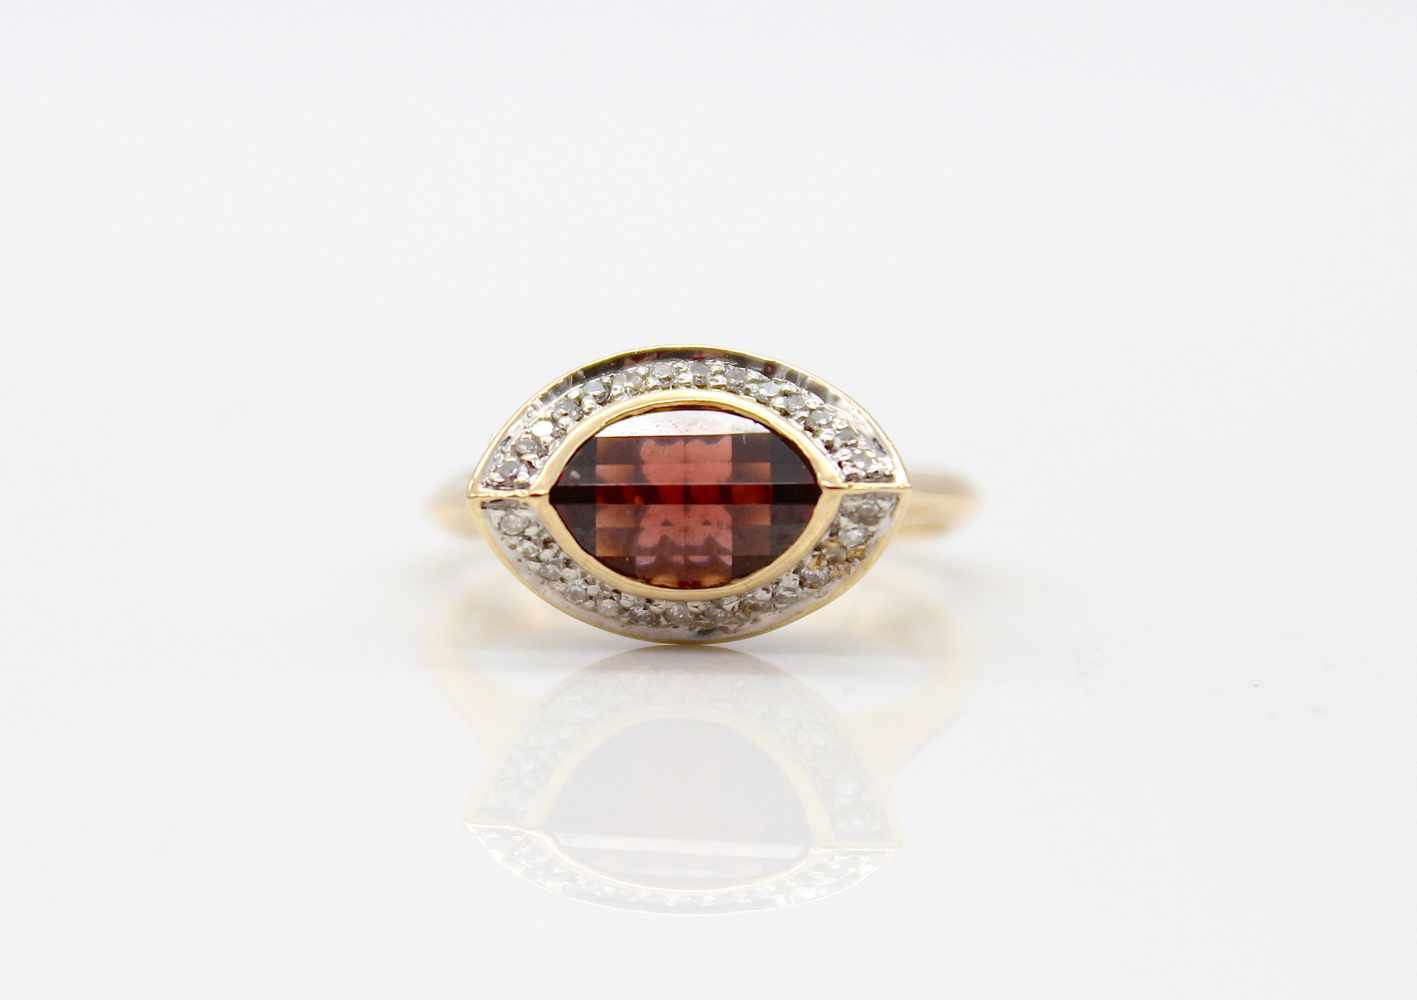 Ring made of 585 gold with a garnet and small diamonds.Weight 5 g, size 56- - -15.00 % buyer's - Image 3 of 4